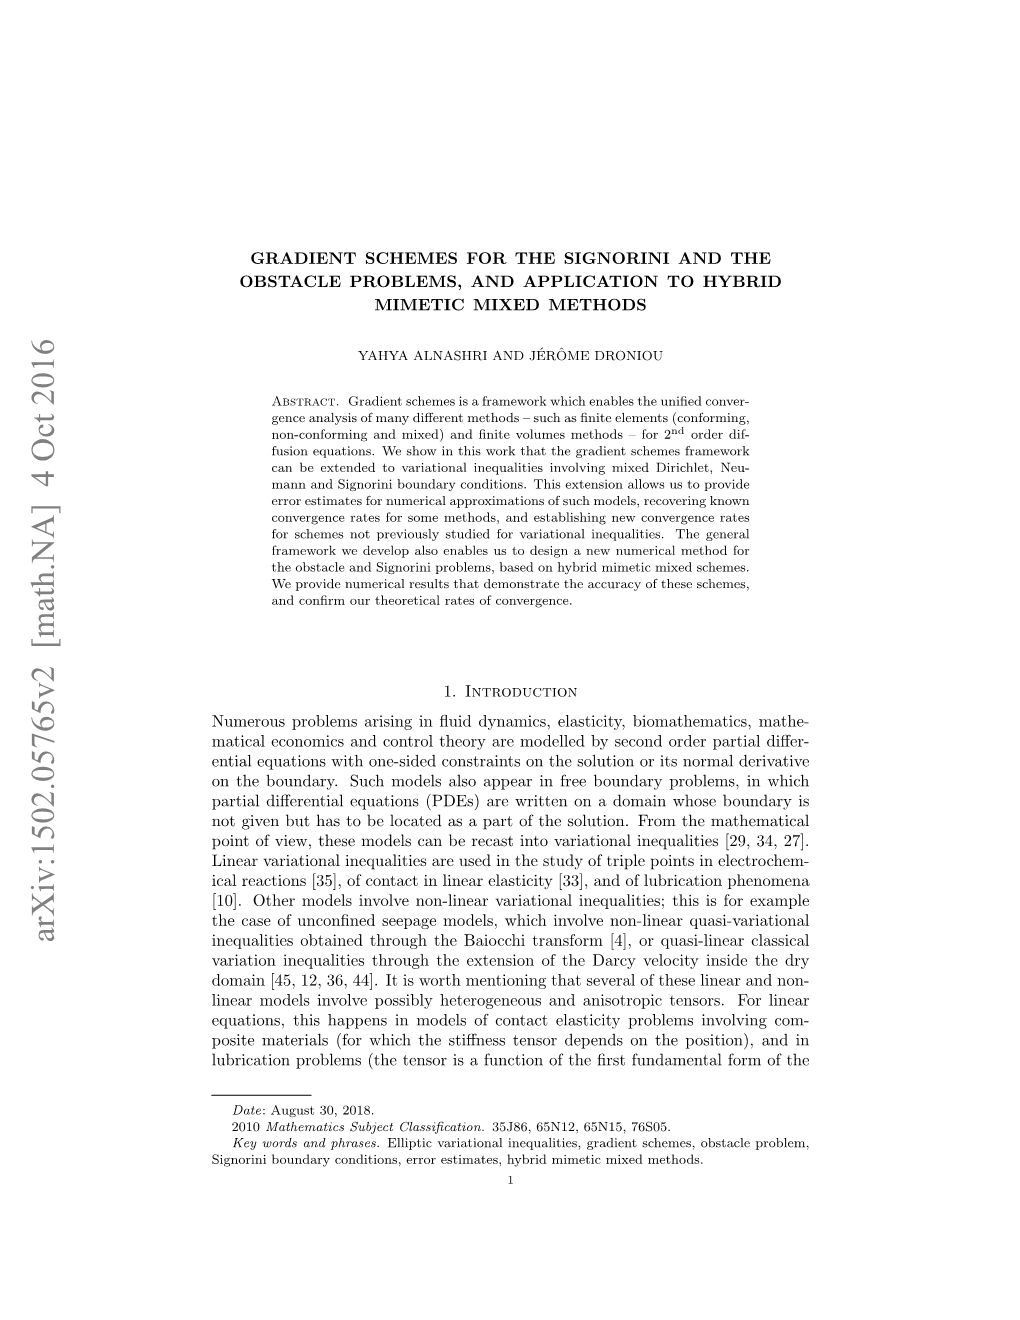 Gradient Schemes for the Signorini and the Obstacle Problems, and Application to Hybrid Mimetic Mixed Methods